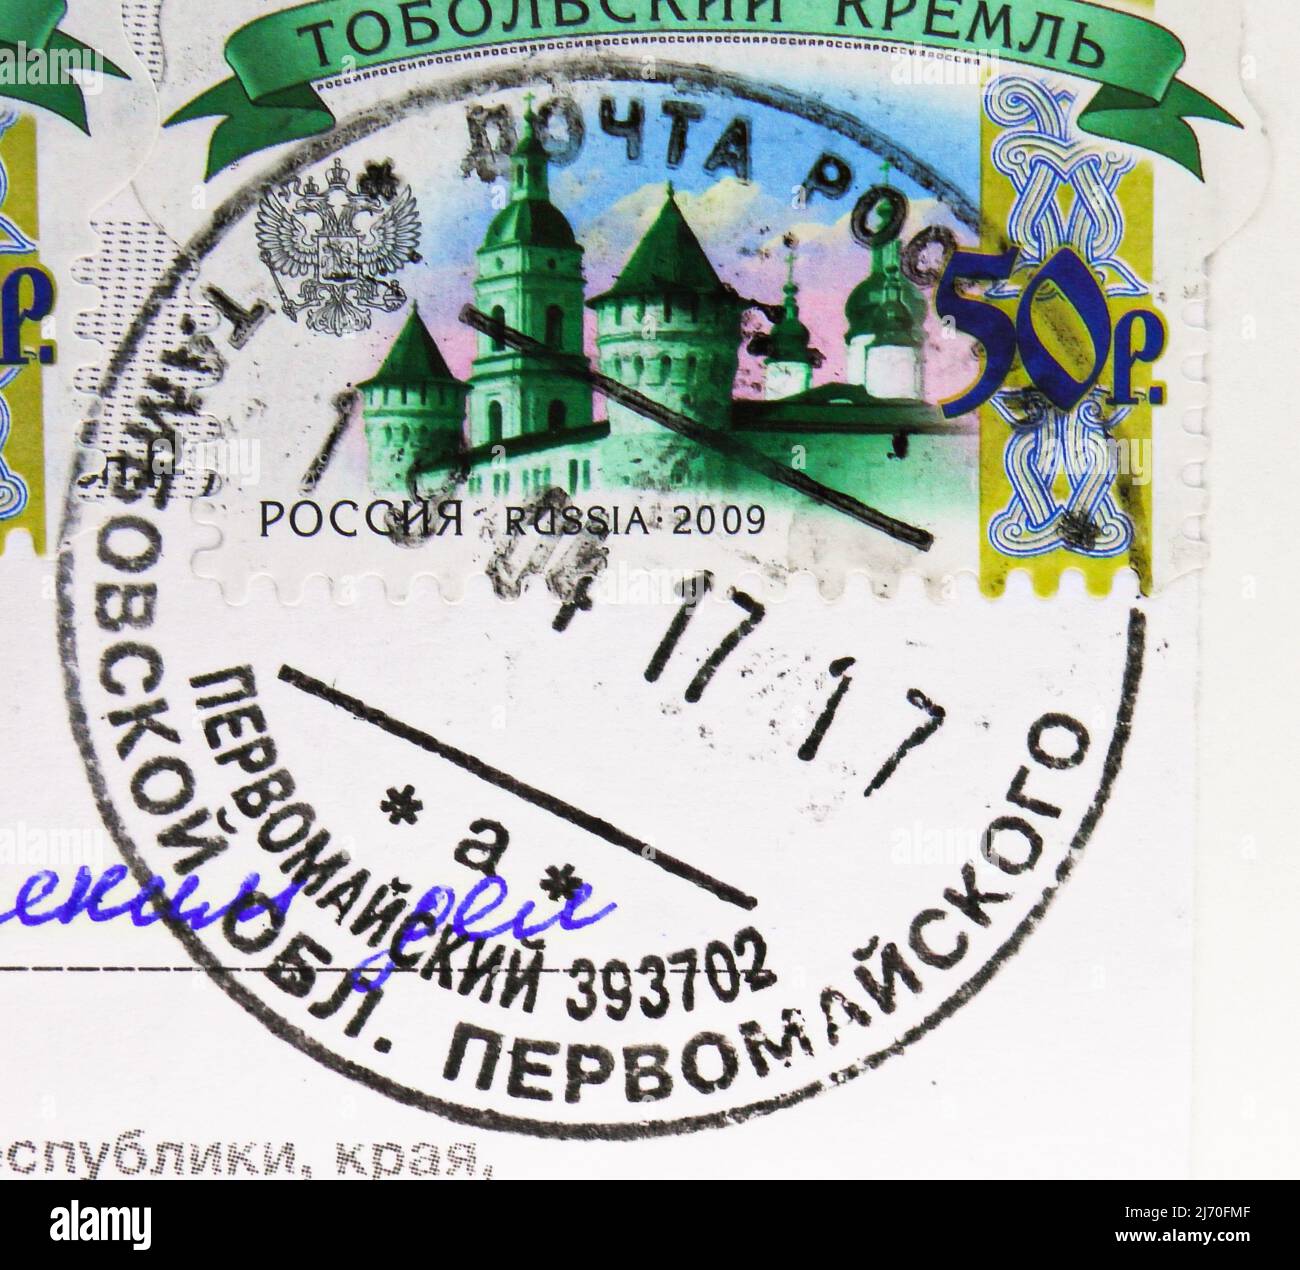 MOSCOW, RUSSIA - JUNE 10, 2021: Postage stamp printed in Russia of Pervomaysky post office, Tambov region, dated 2017 Stock Photo